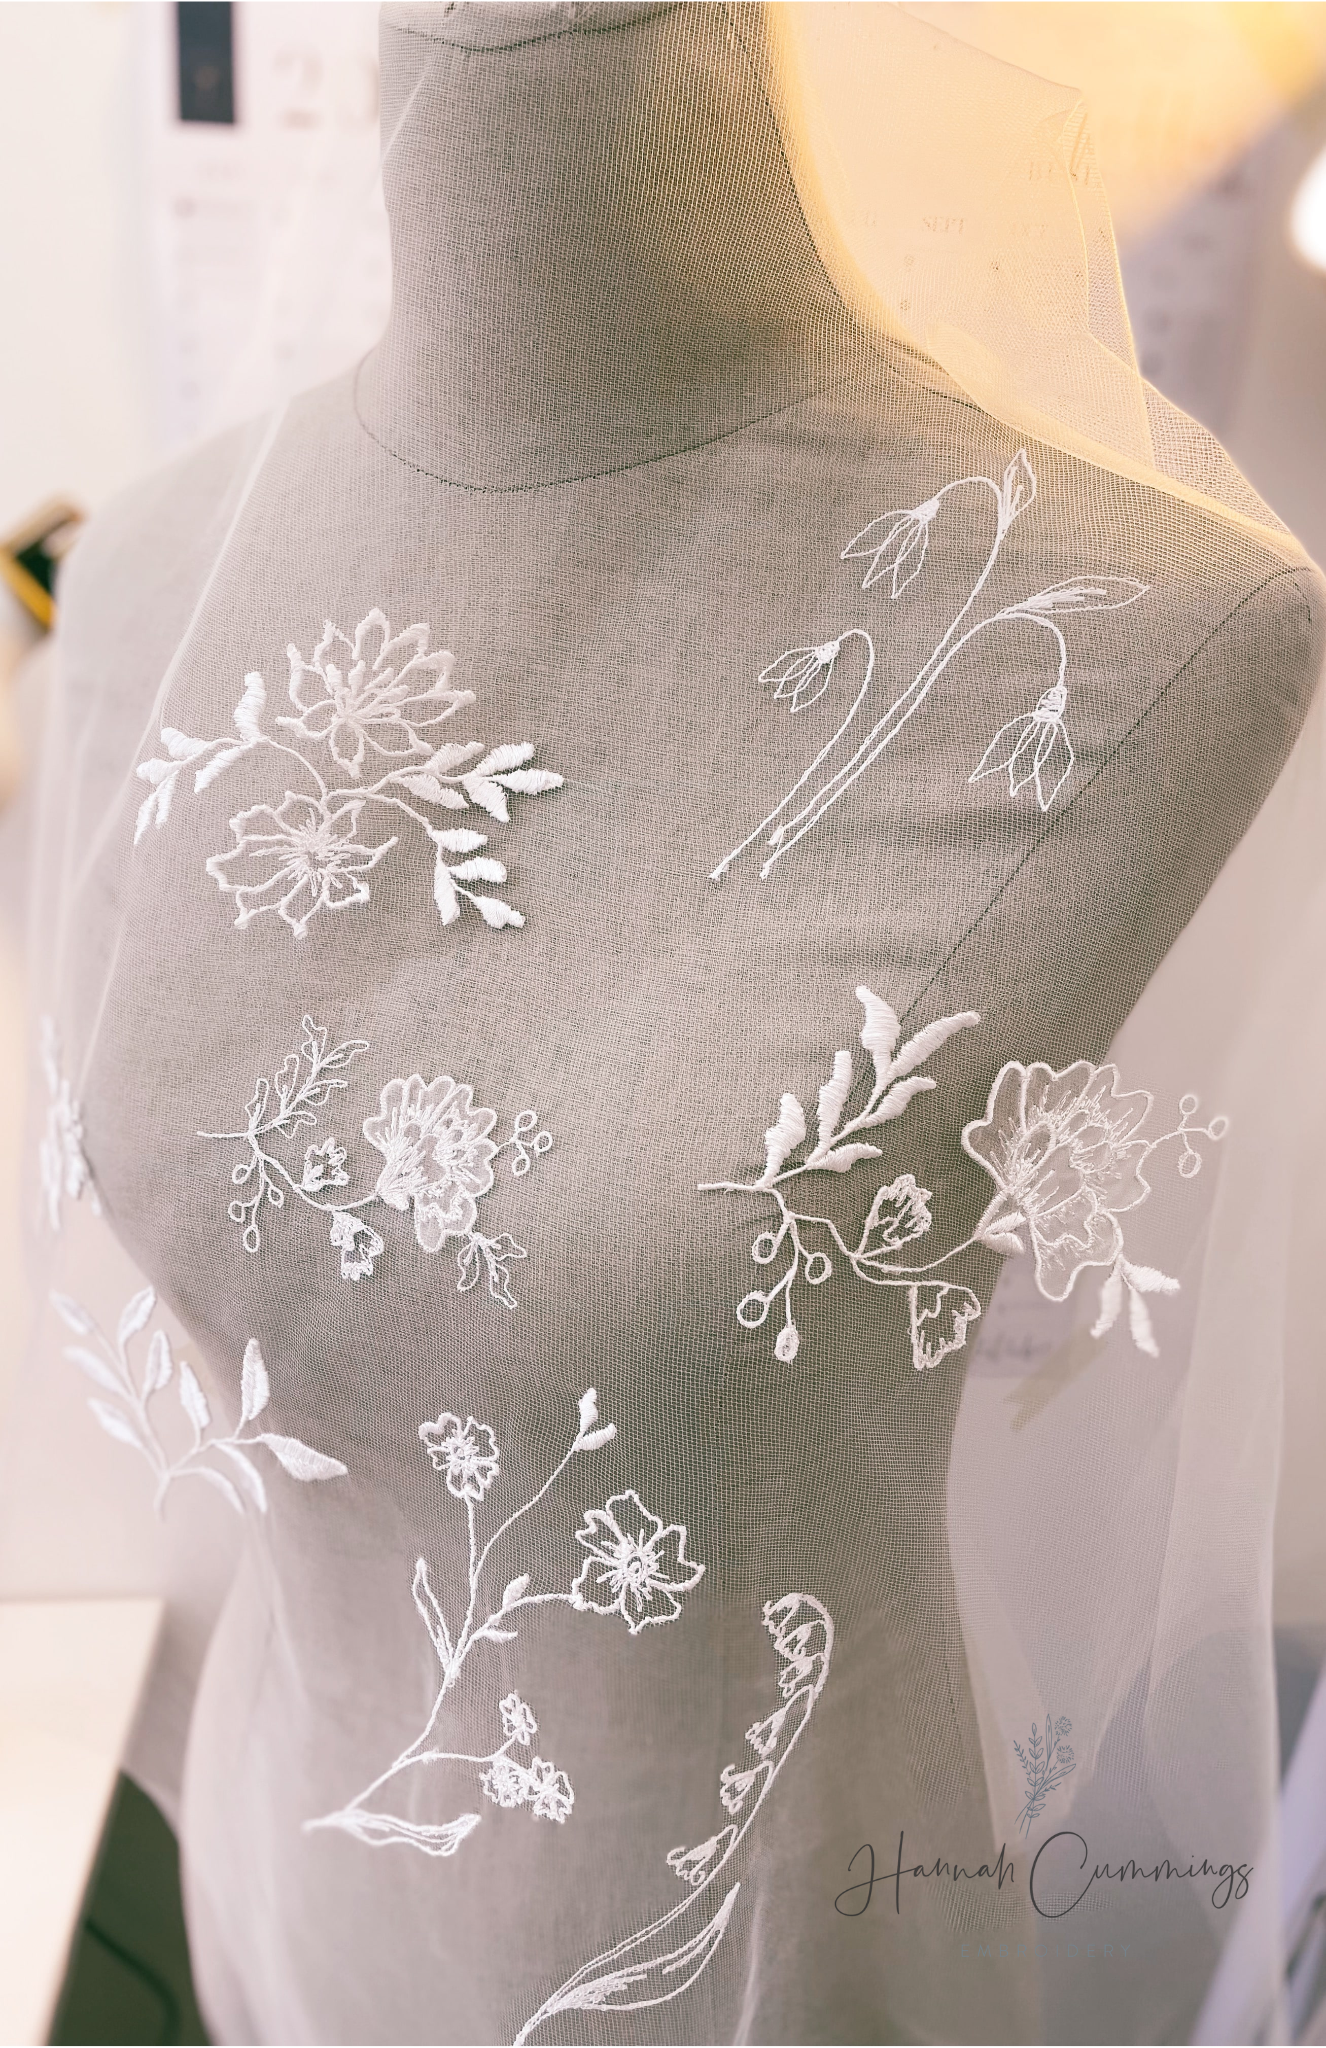 Embroidery shown against mannequin